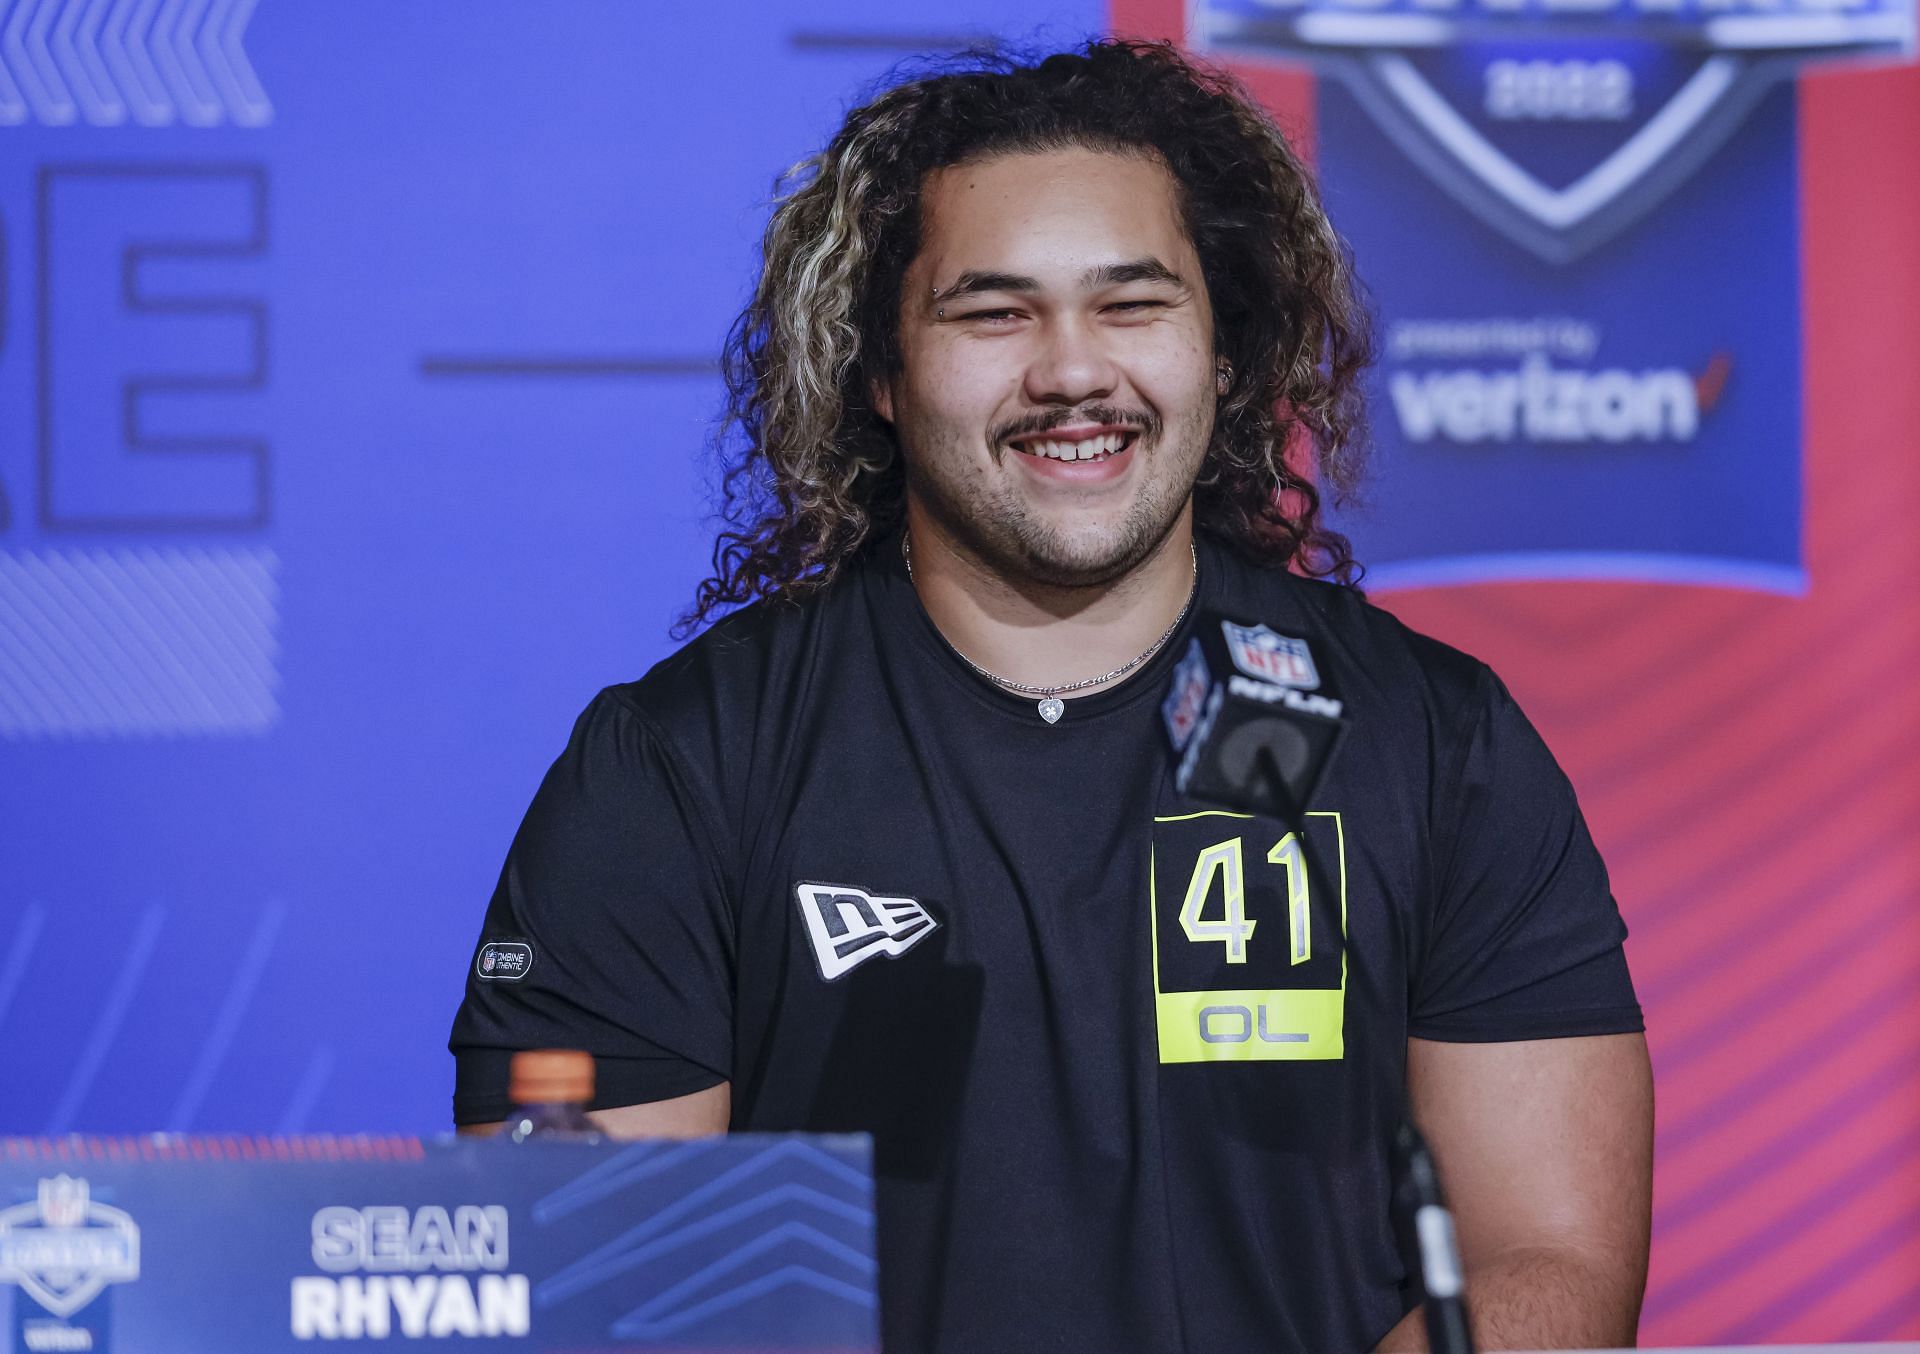 Sean Rhyan at the NFL Combine